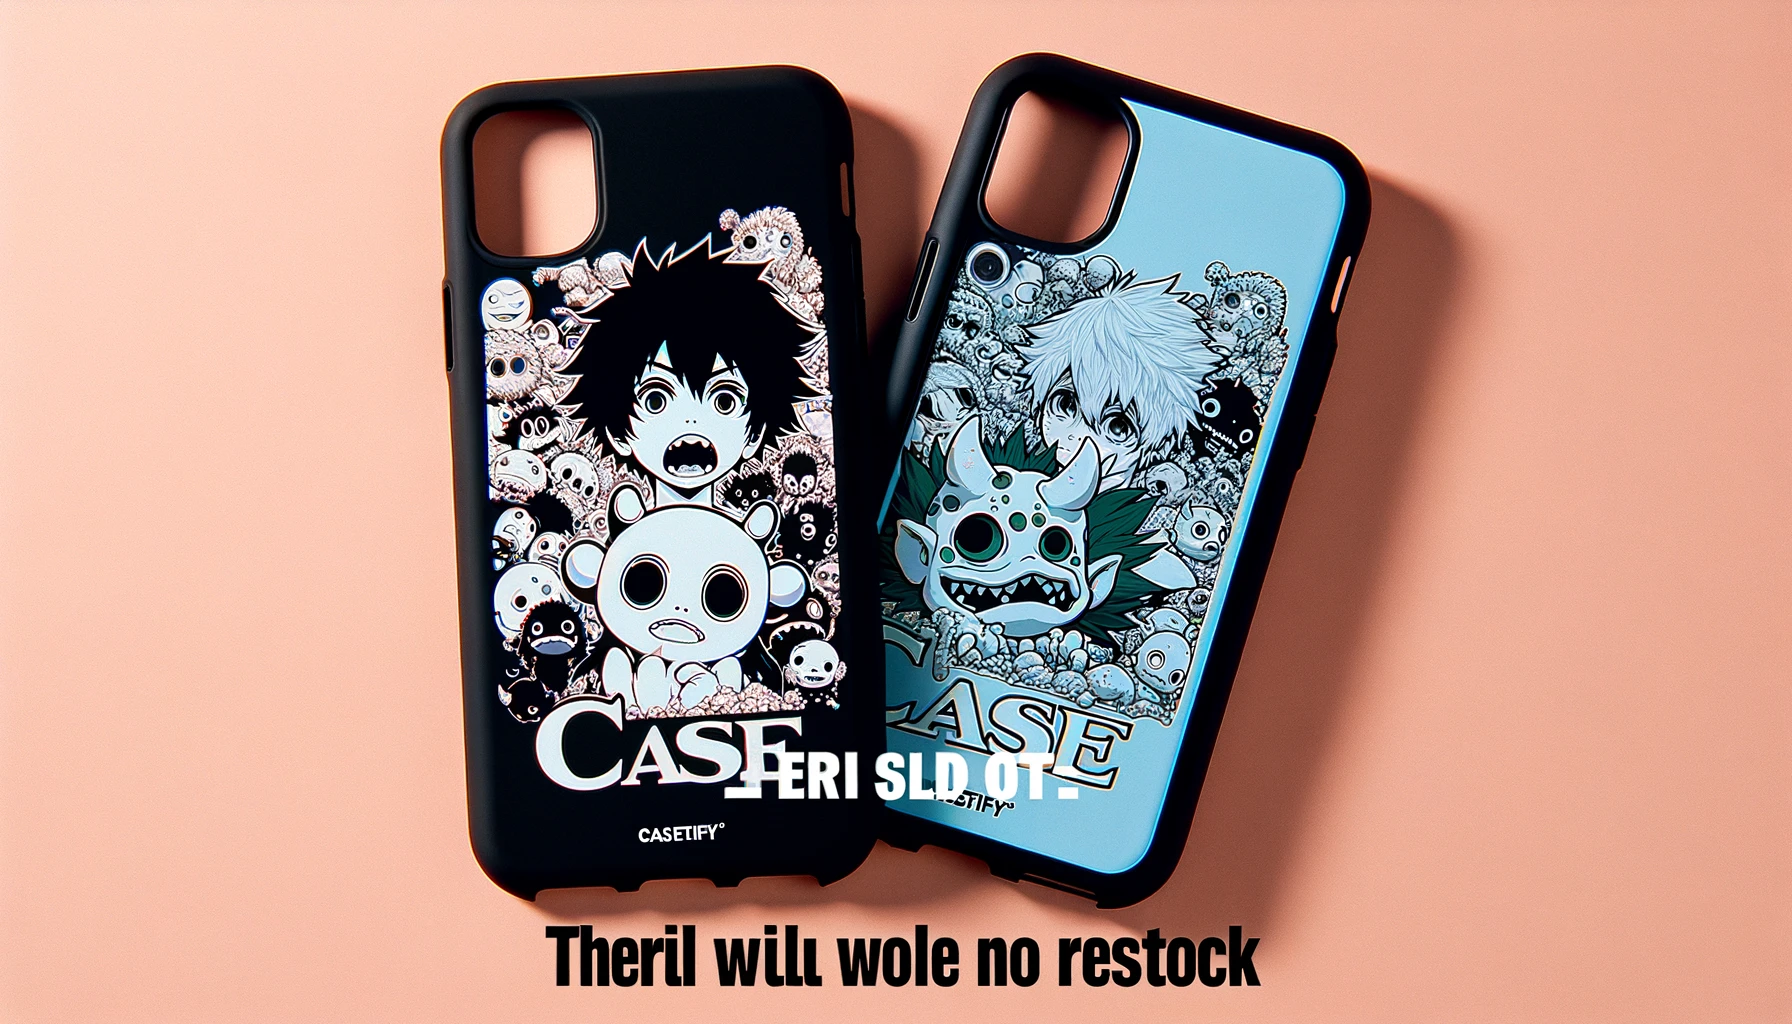 A clear and bold image emphasizing that there will be no restock for CASETiFY smartphone cases featuring small monster anime character collaboration products. The design should stress the exclusivity and urgency of getting these cases before they sell out. The word 'CASE' should be prominently displayed on the image.